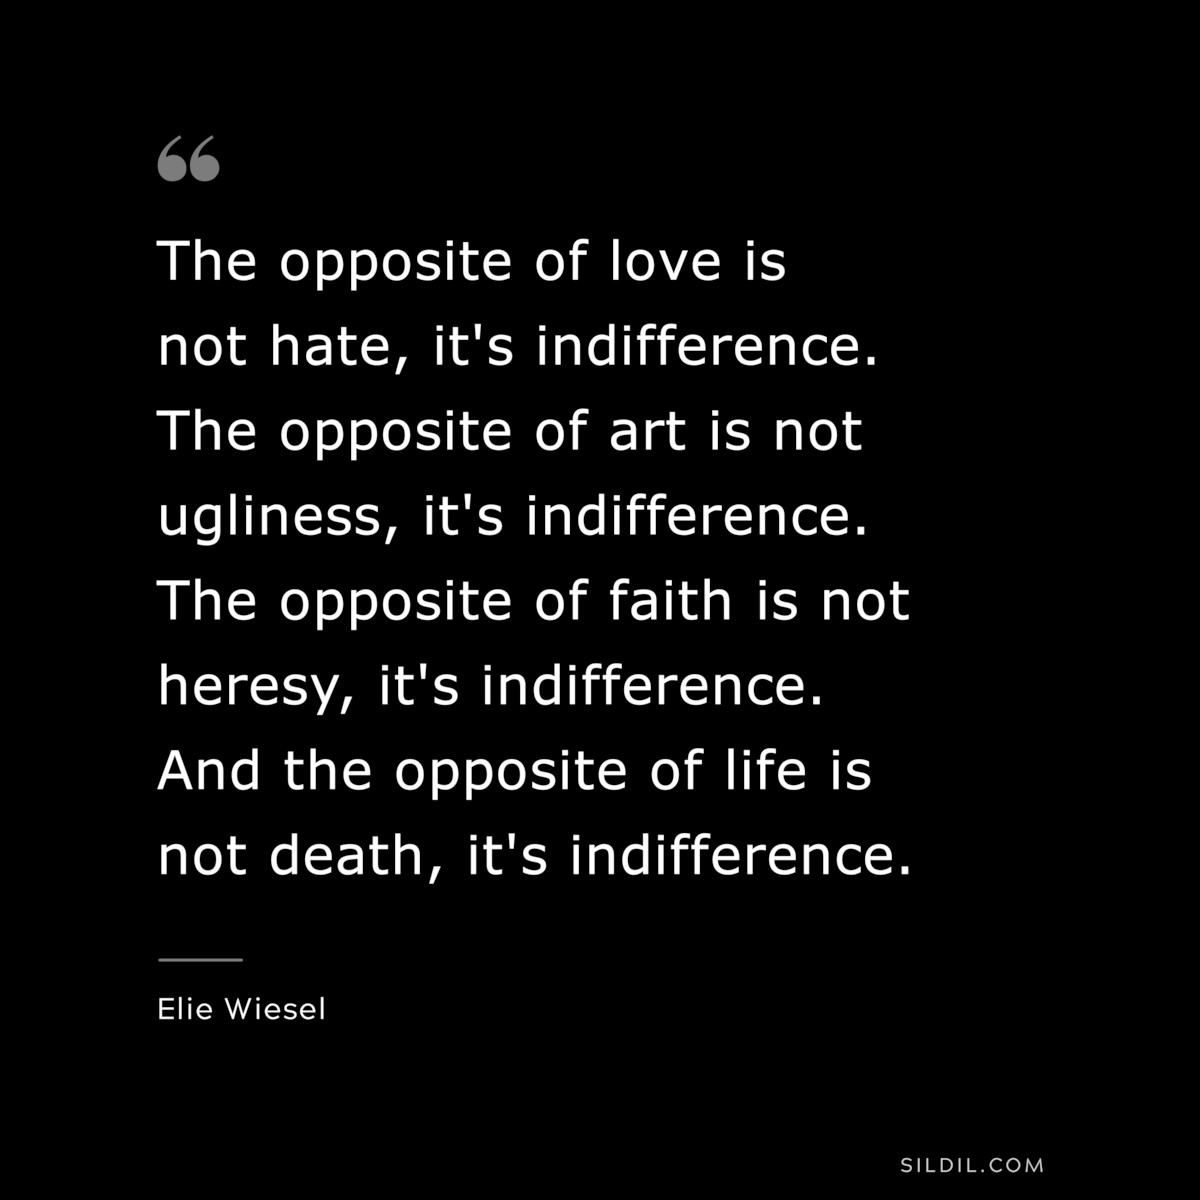 The opposite of love is not hate, it's indifference. The opposite of art is not ugliness, it's indifference. The opposite of faith is not heresy, it's indifference. And the opposite of life is not death, it's indifference. ― Elie Wiesel